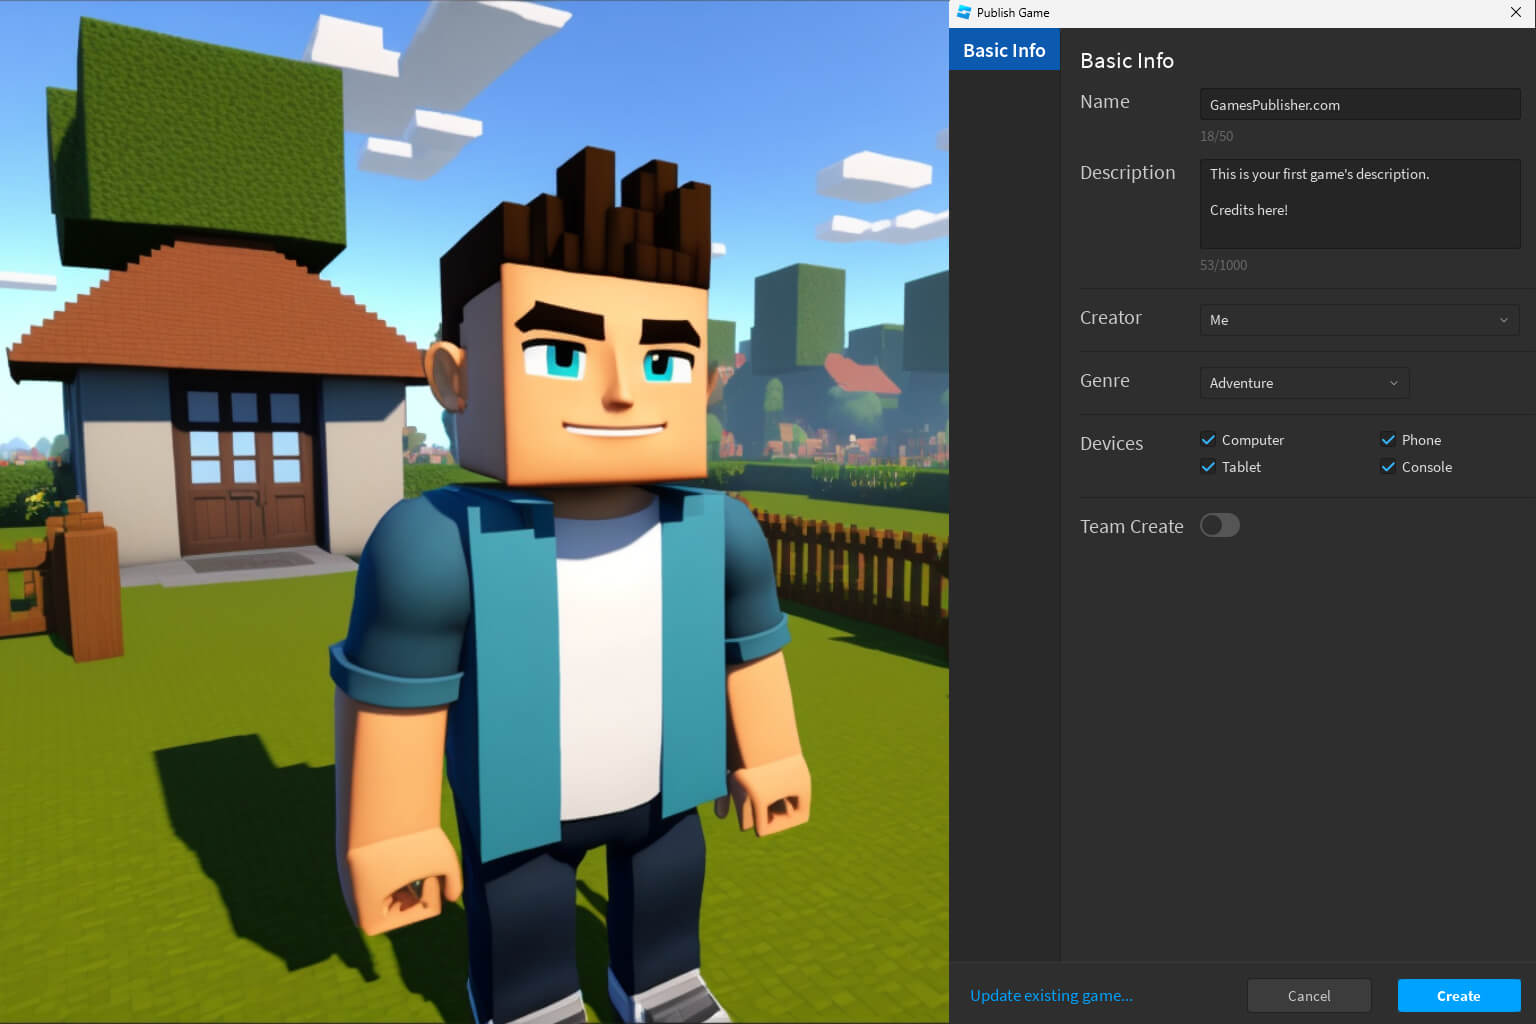 How to Publish a Game on Roblox